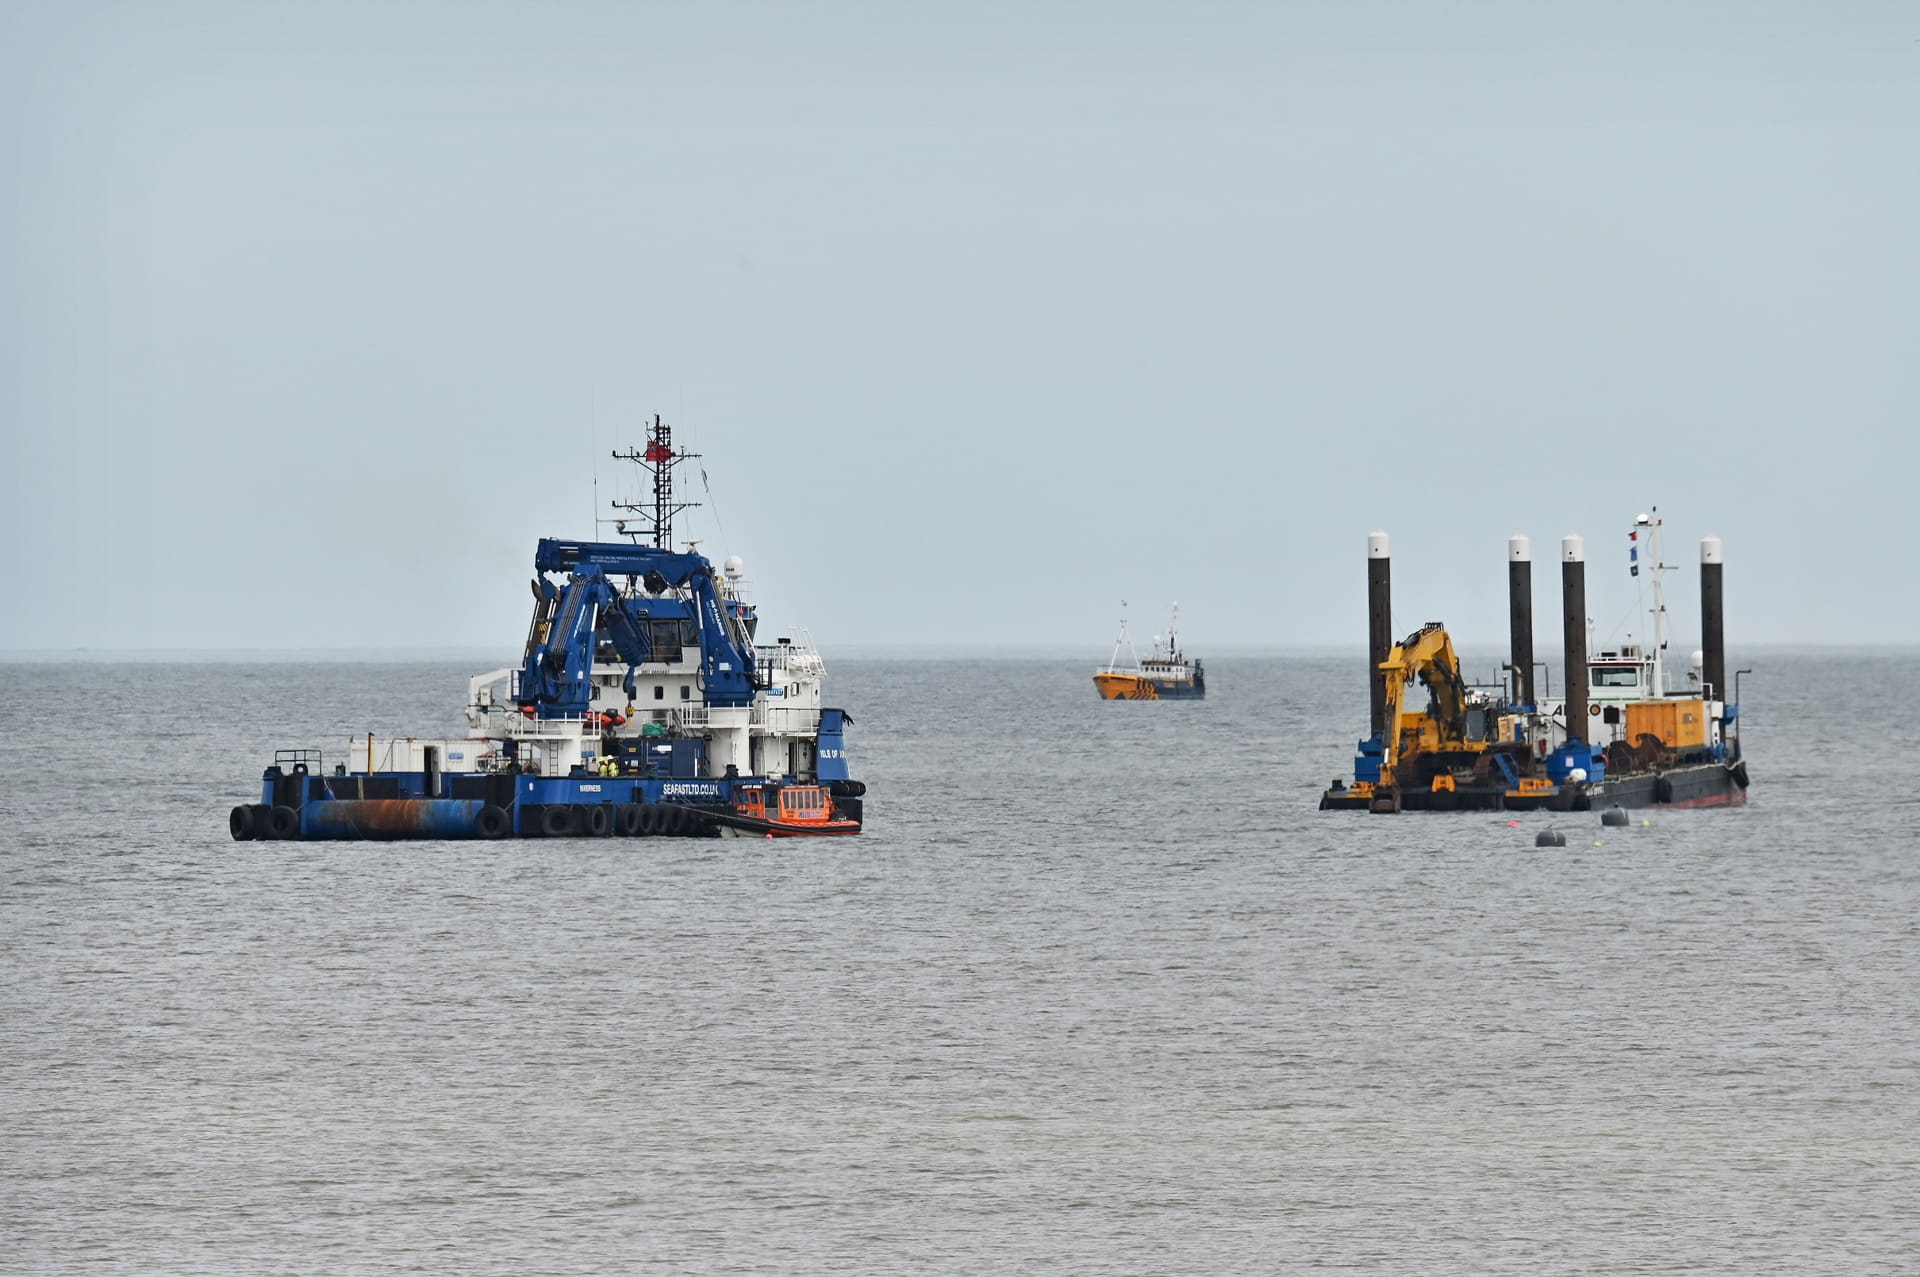 Vessels at Dogger Bank A site during export cable installation work